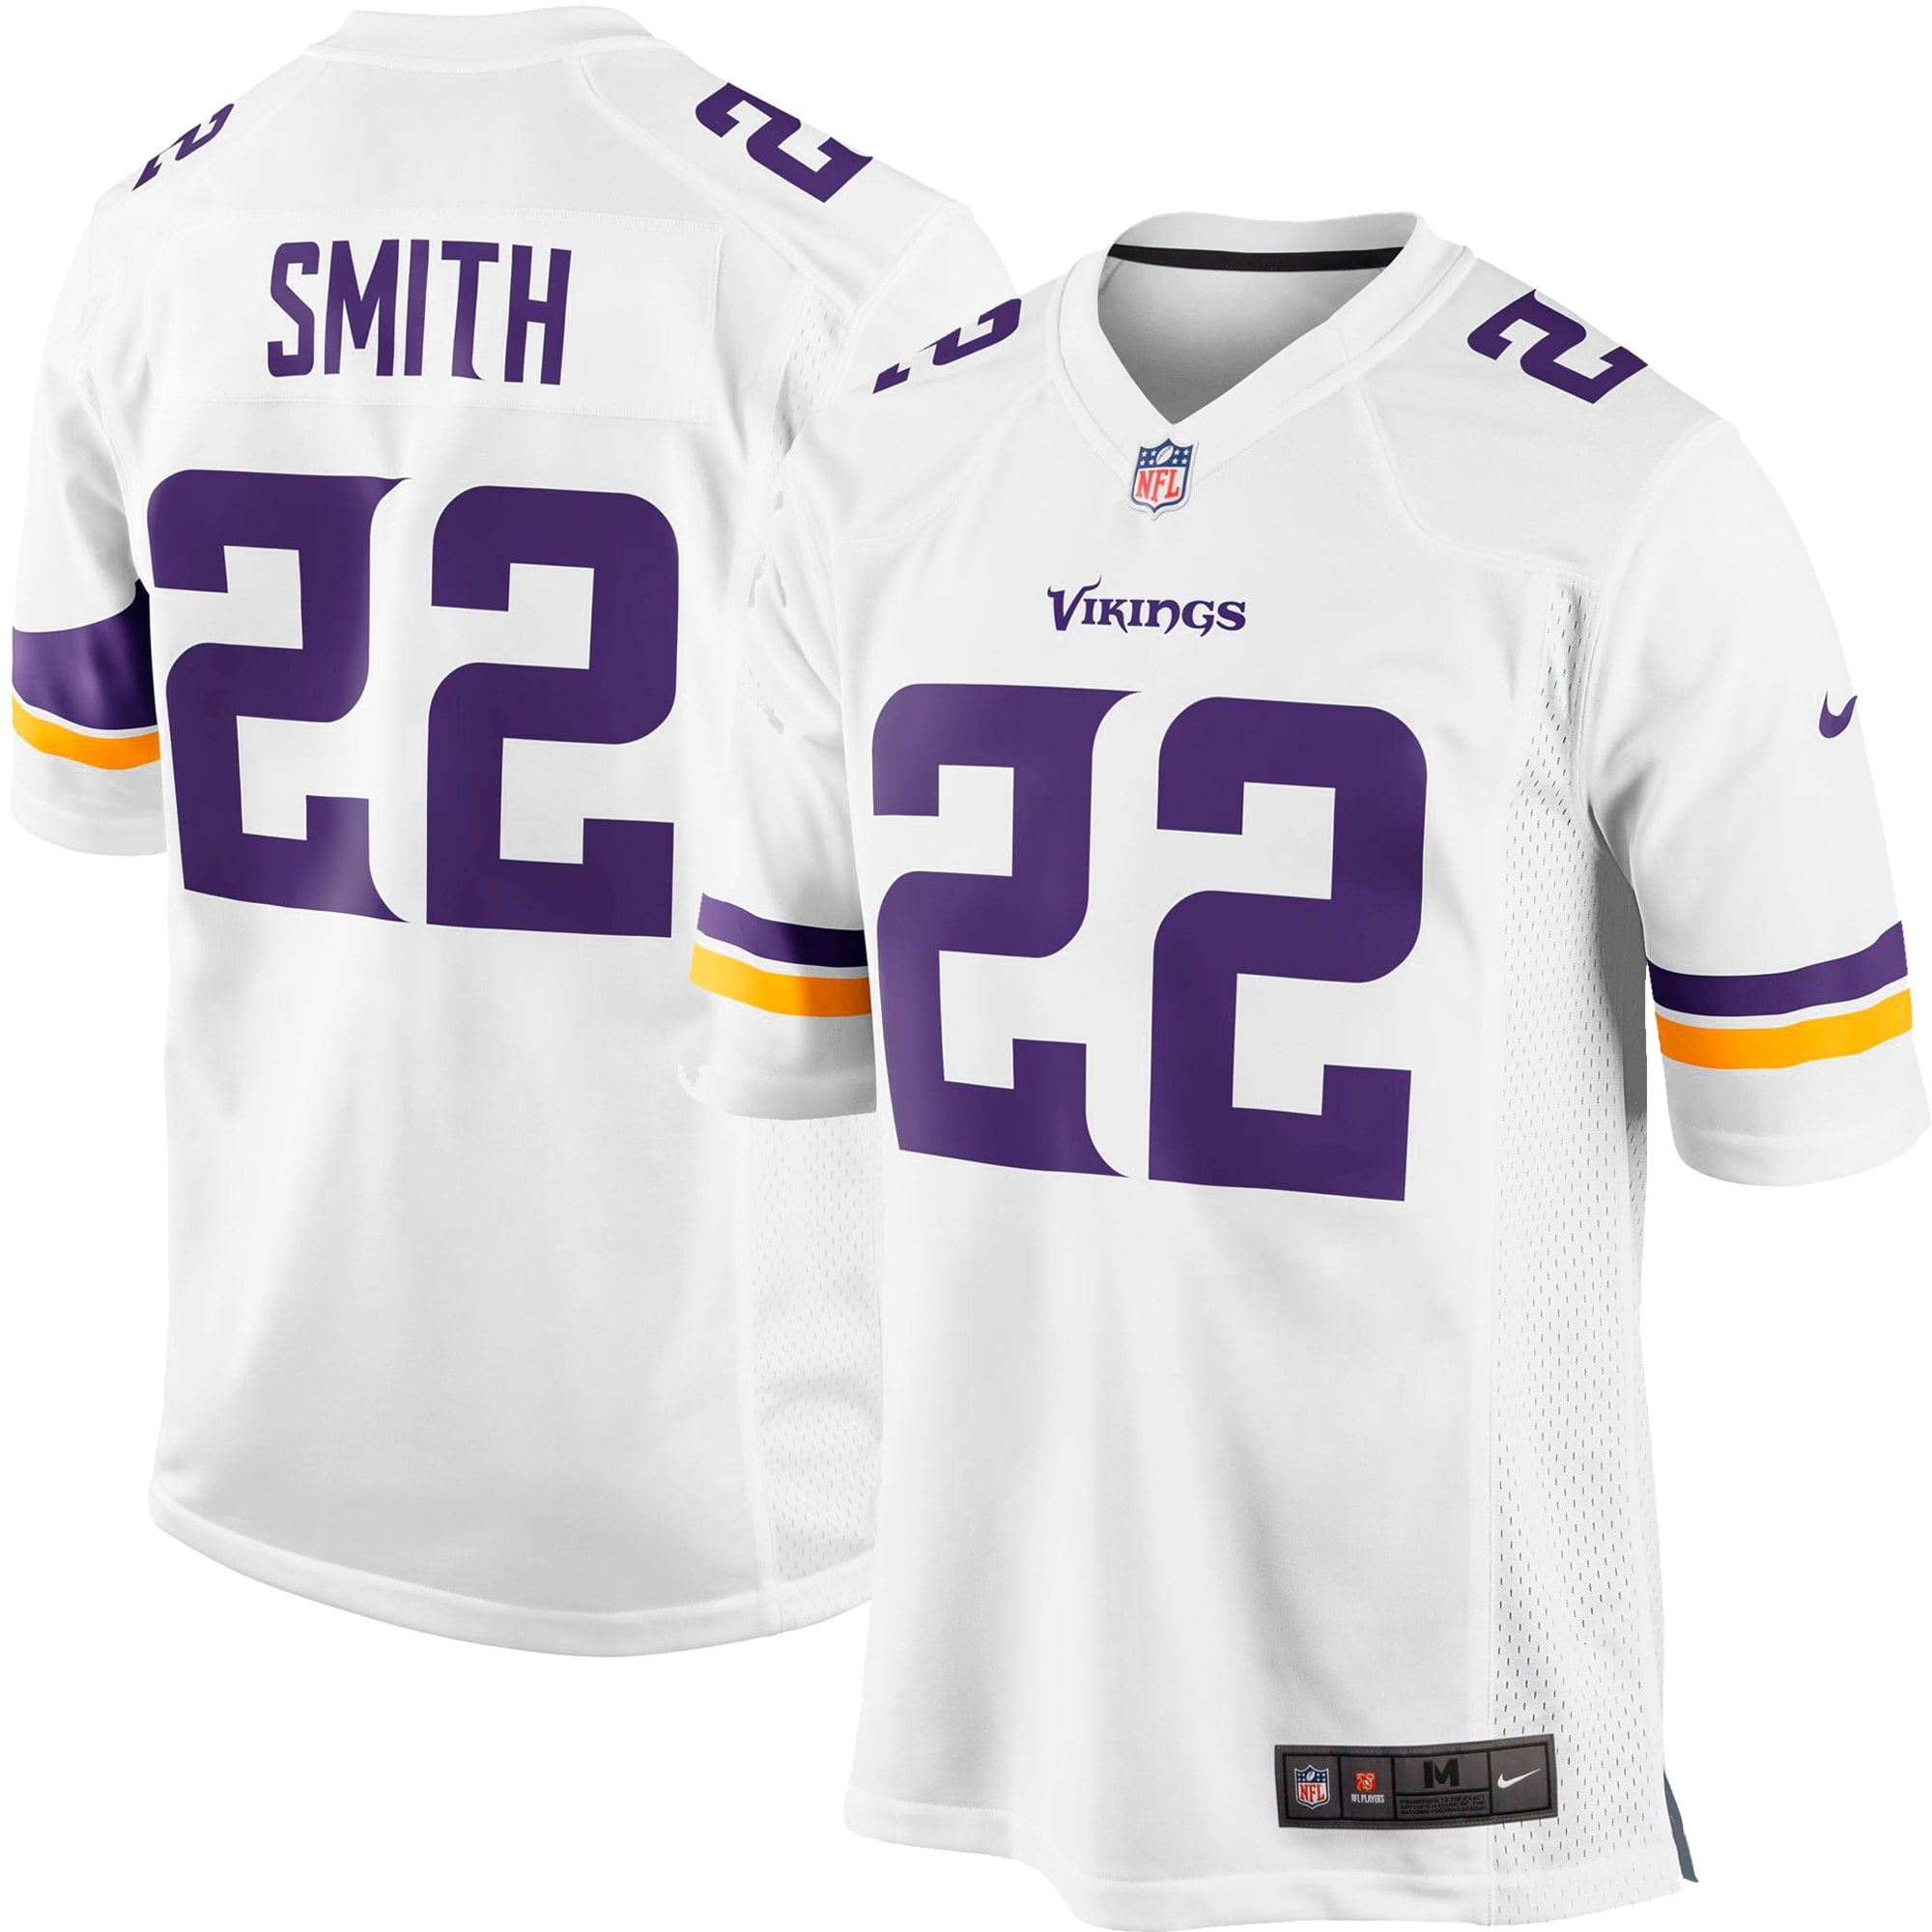 harrison smith game jersey